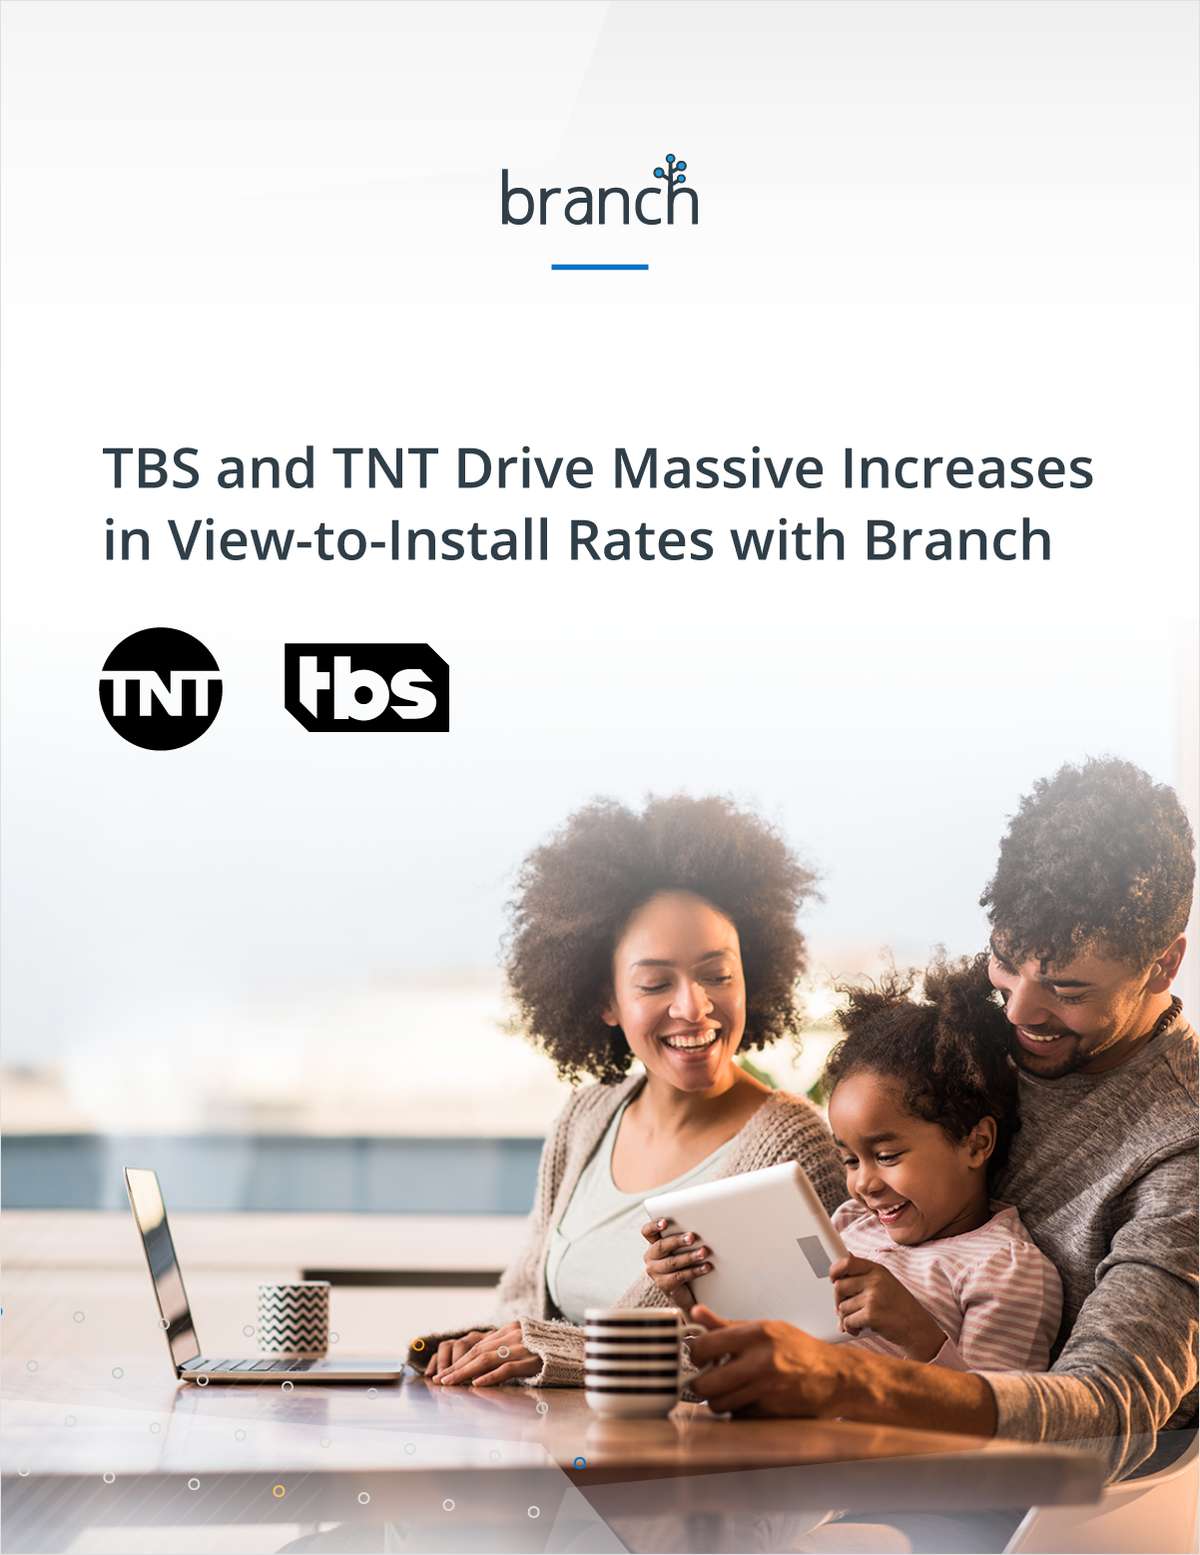 TBS and TNT Drive Massive Increases in View-to-Install Rates With Branch